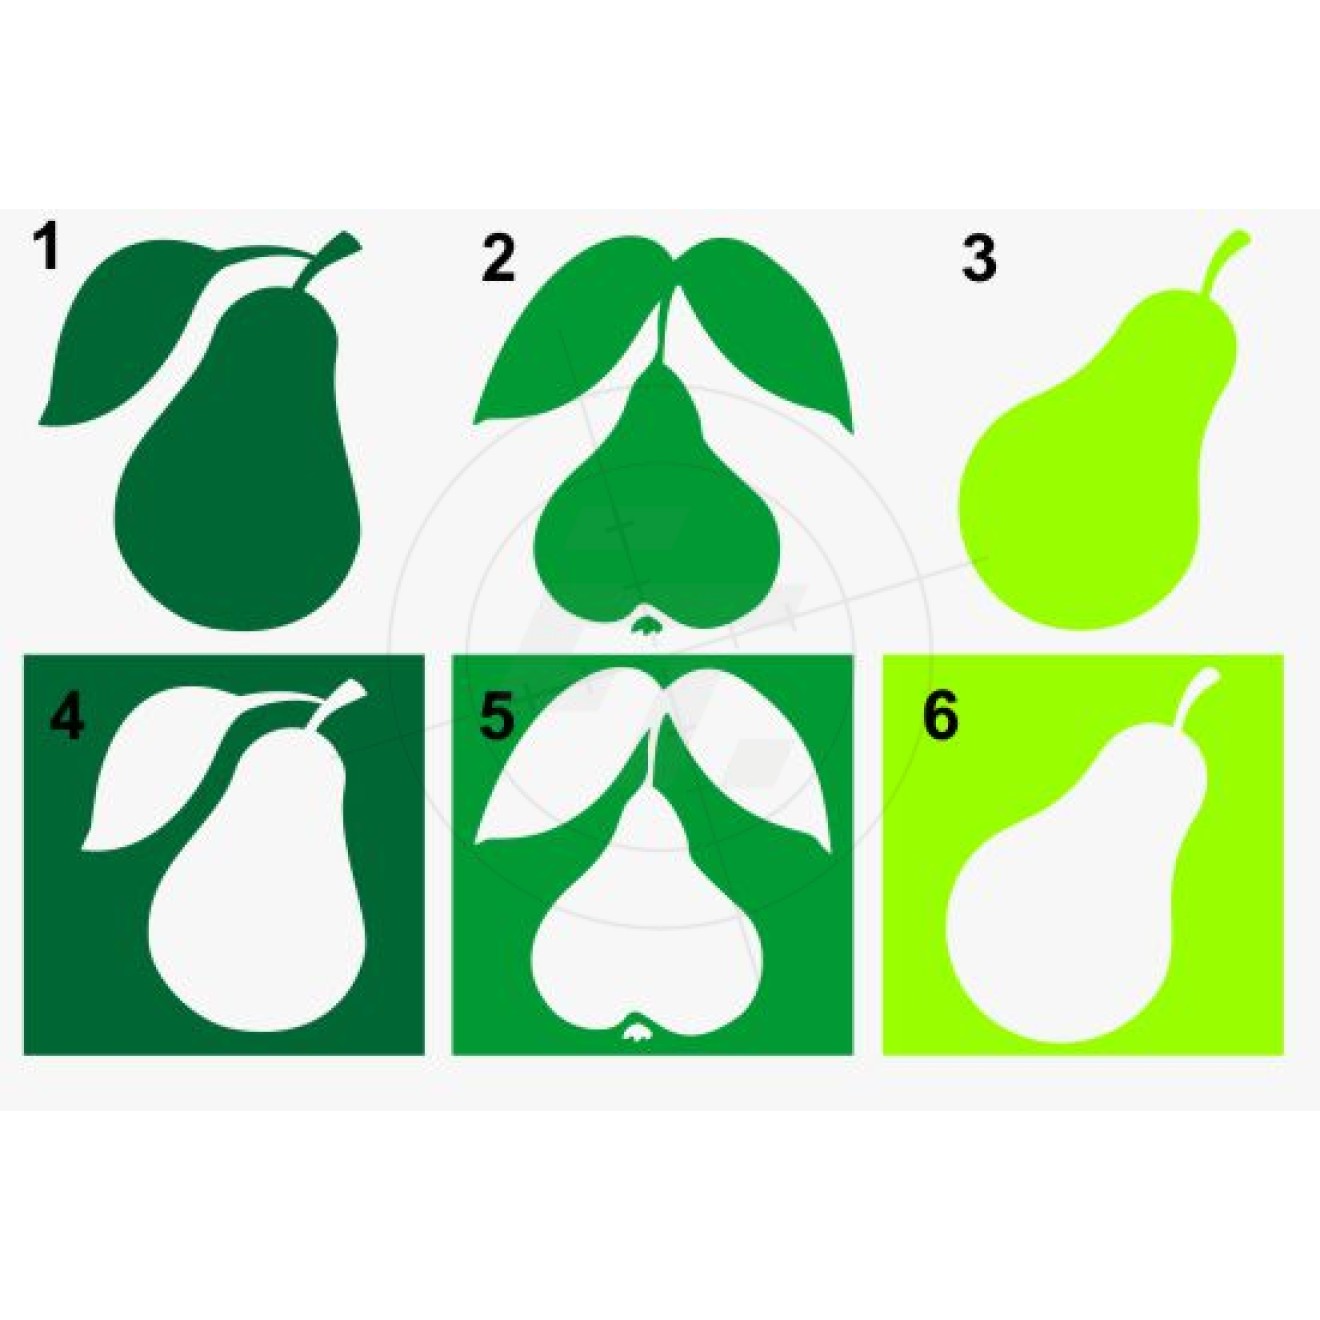 Pear with stem and one or two leaves